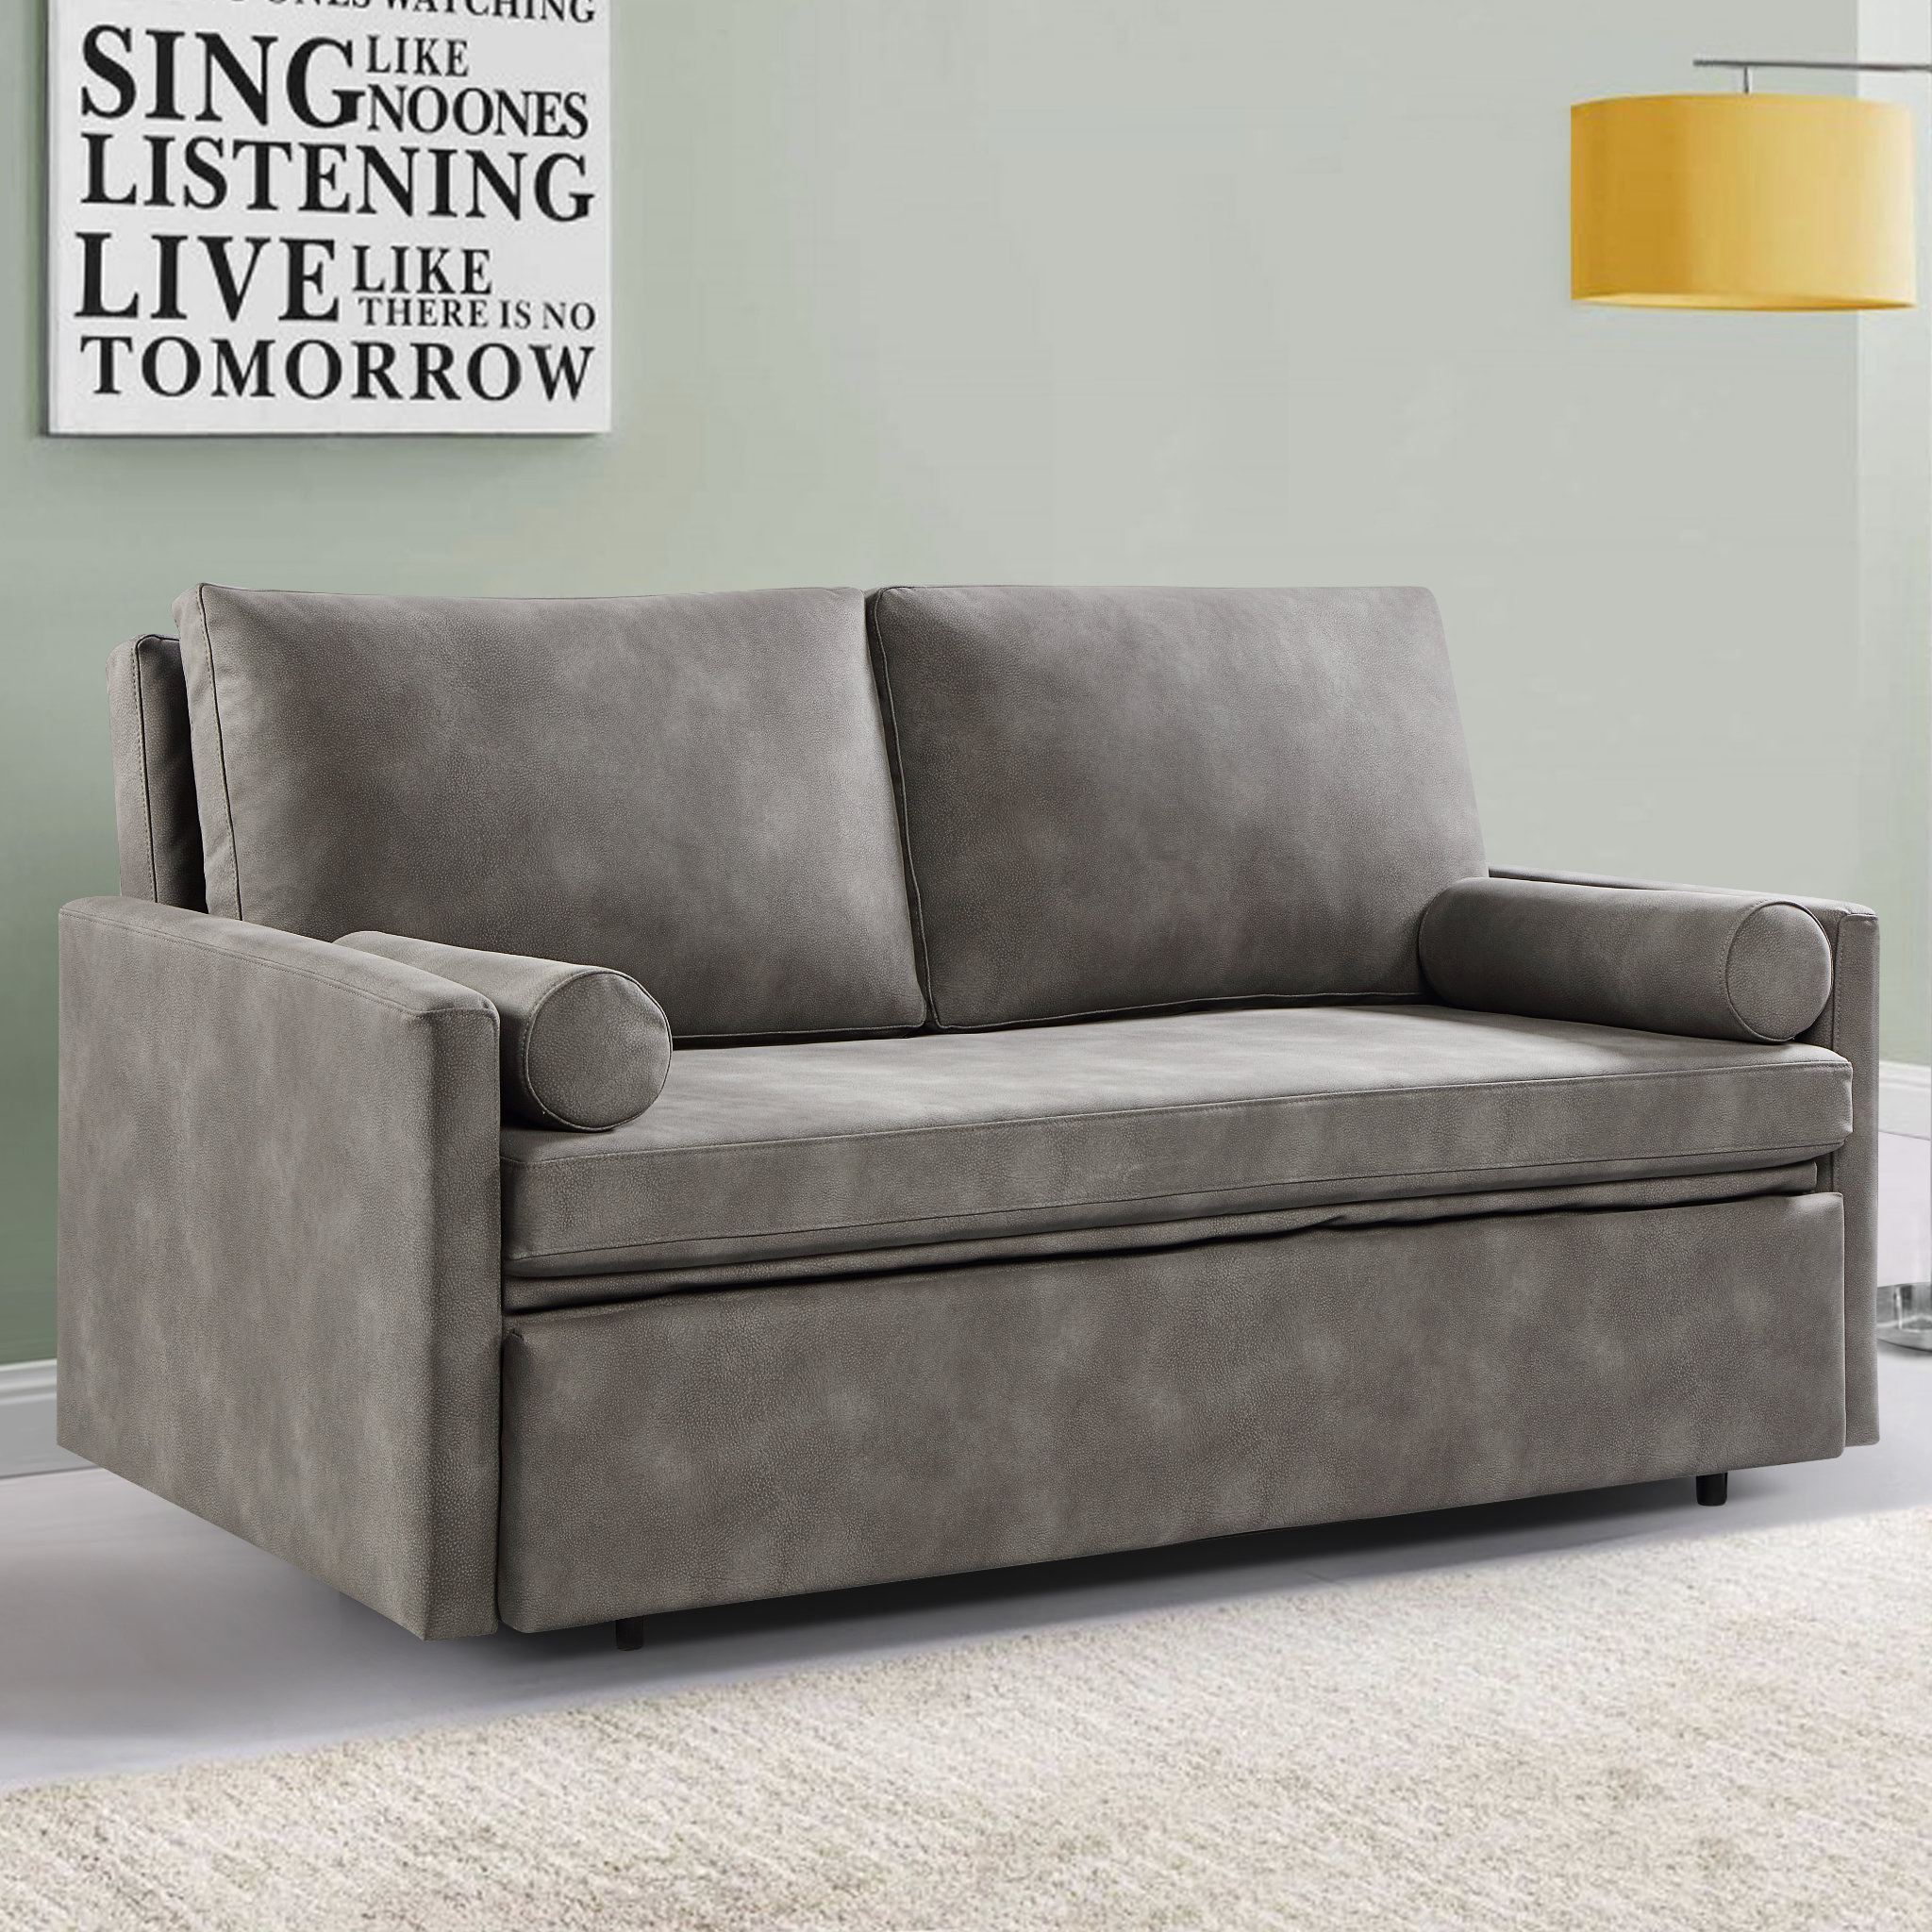 Harmony Sofa Bed Queen Eco Leather, Grey Sofa Bed Queen